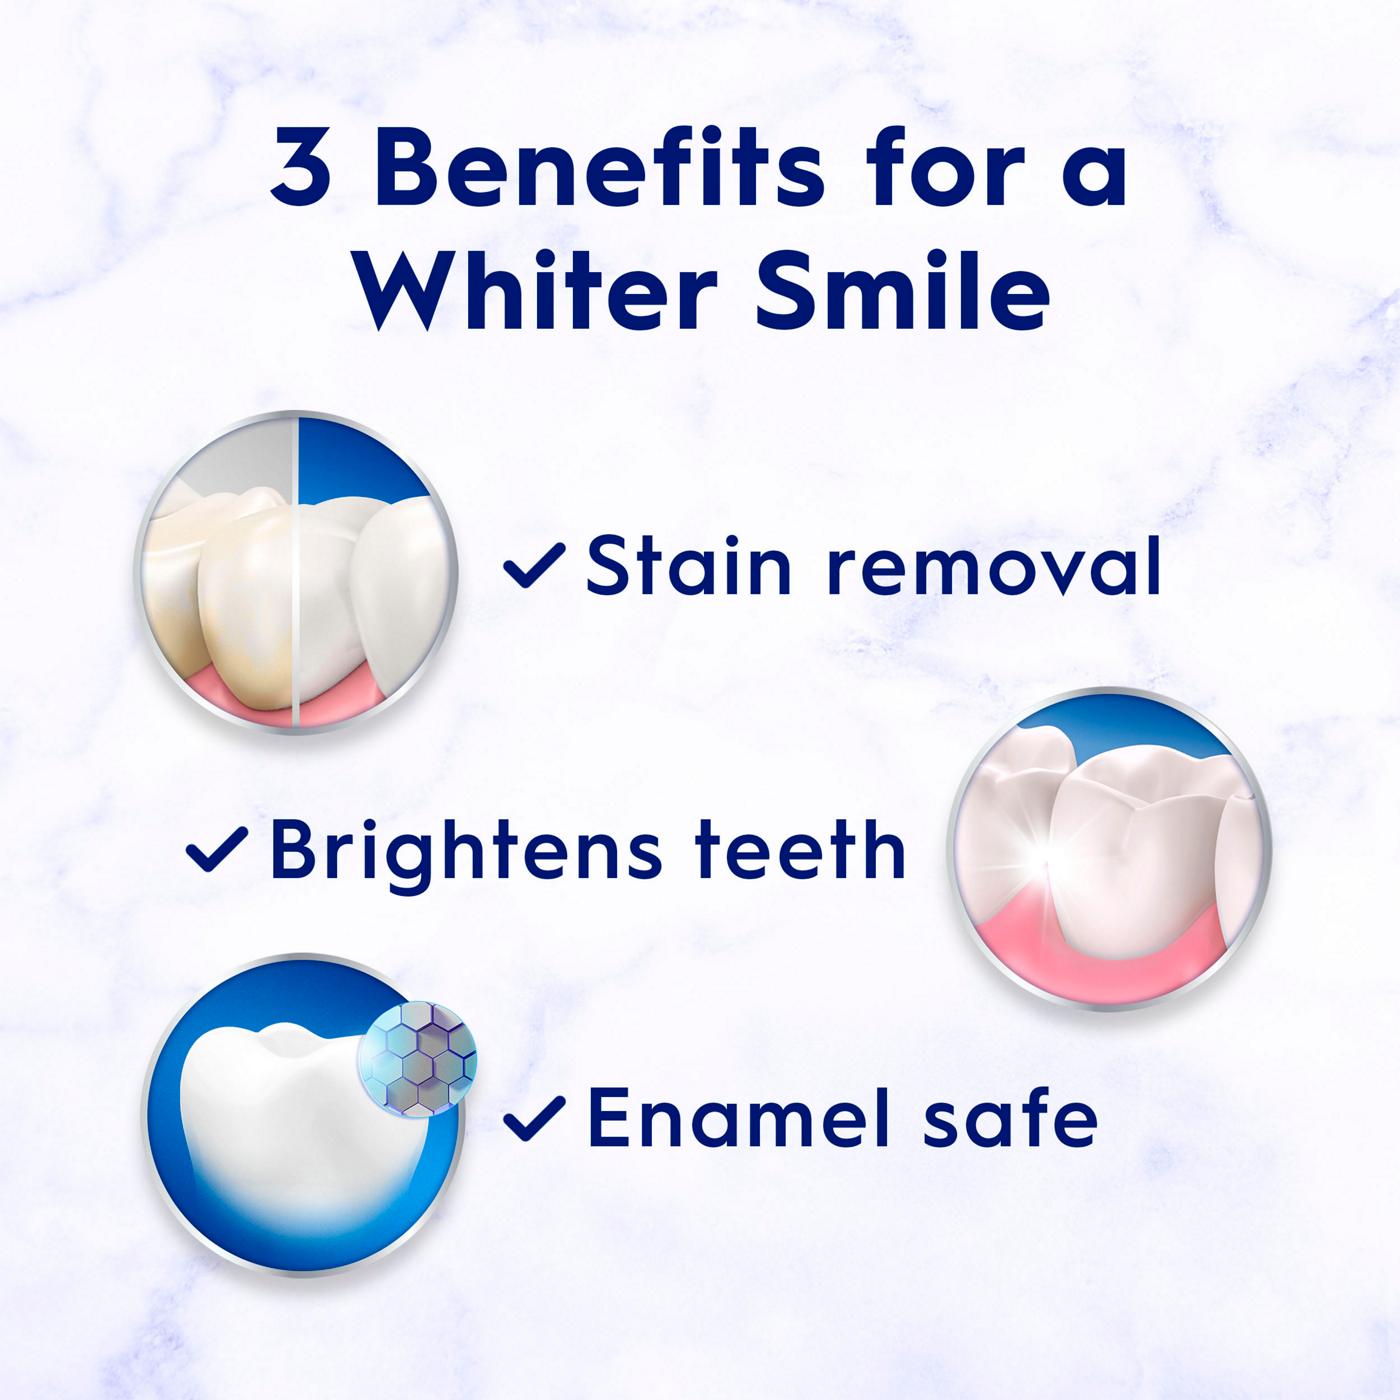 Crest 3D White Whitening Toothpaste - Radiant Mint; image 2 of 8